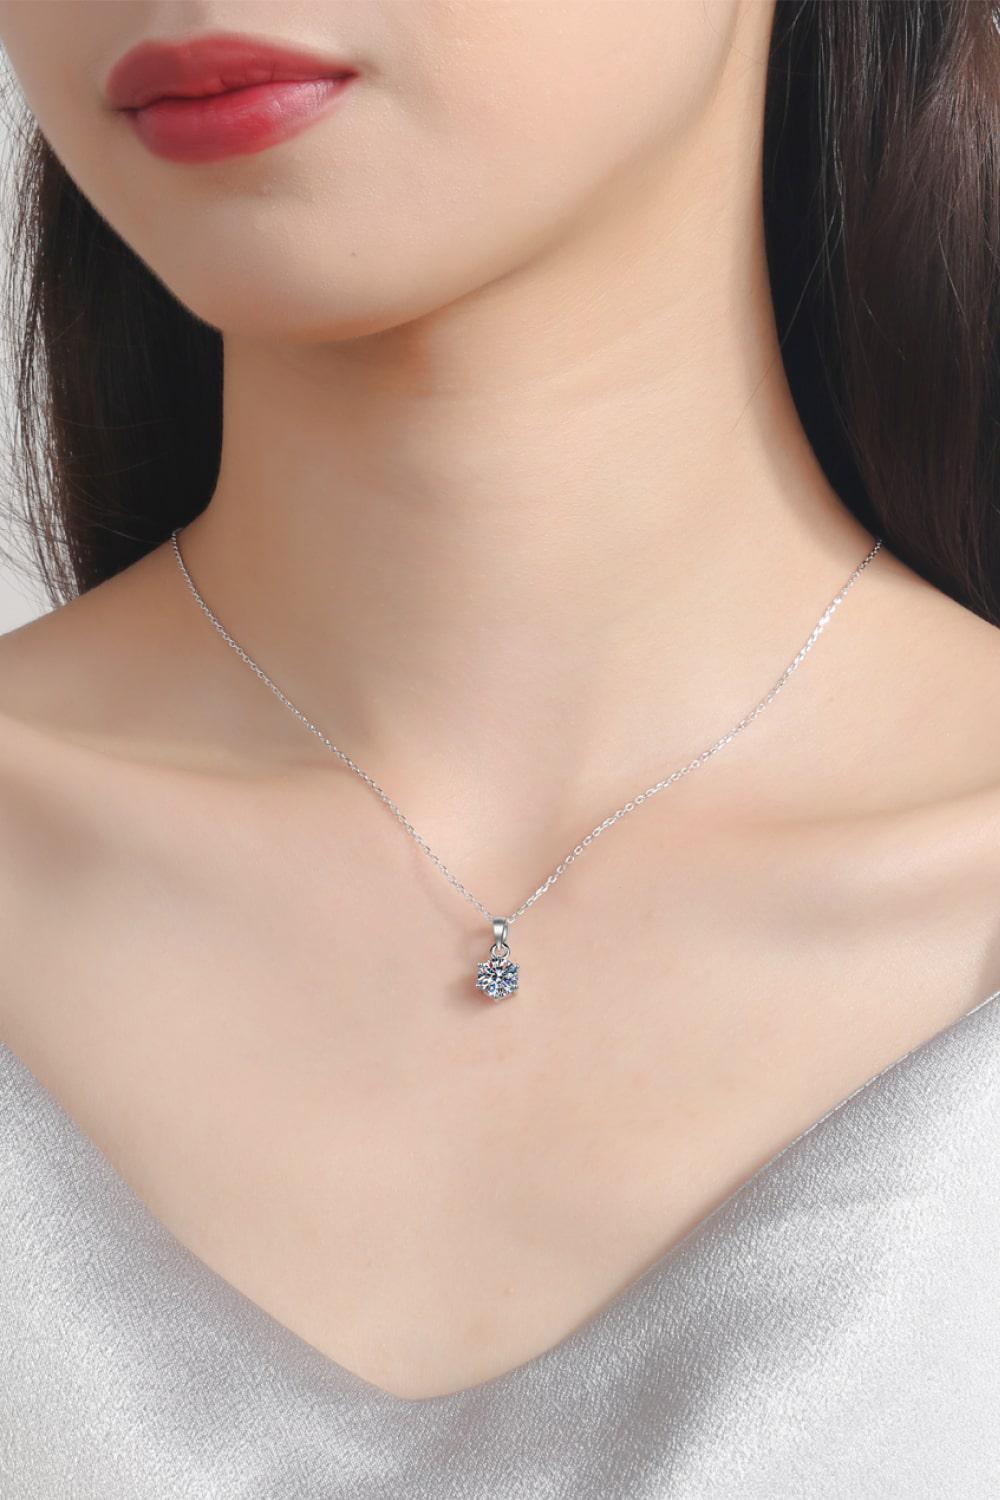 Get What You Need Moissanite Pendant Necklace BLUE ZONE PLANET